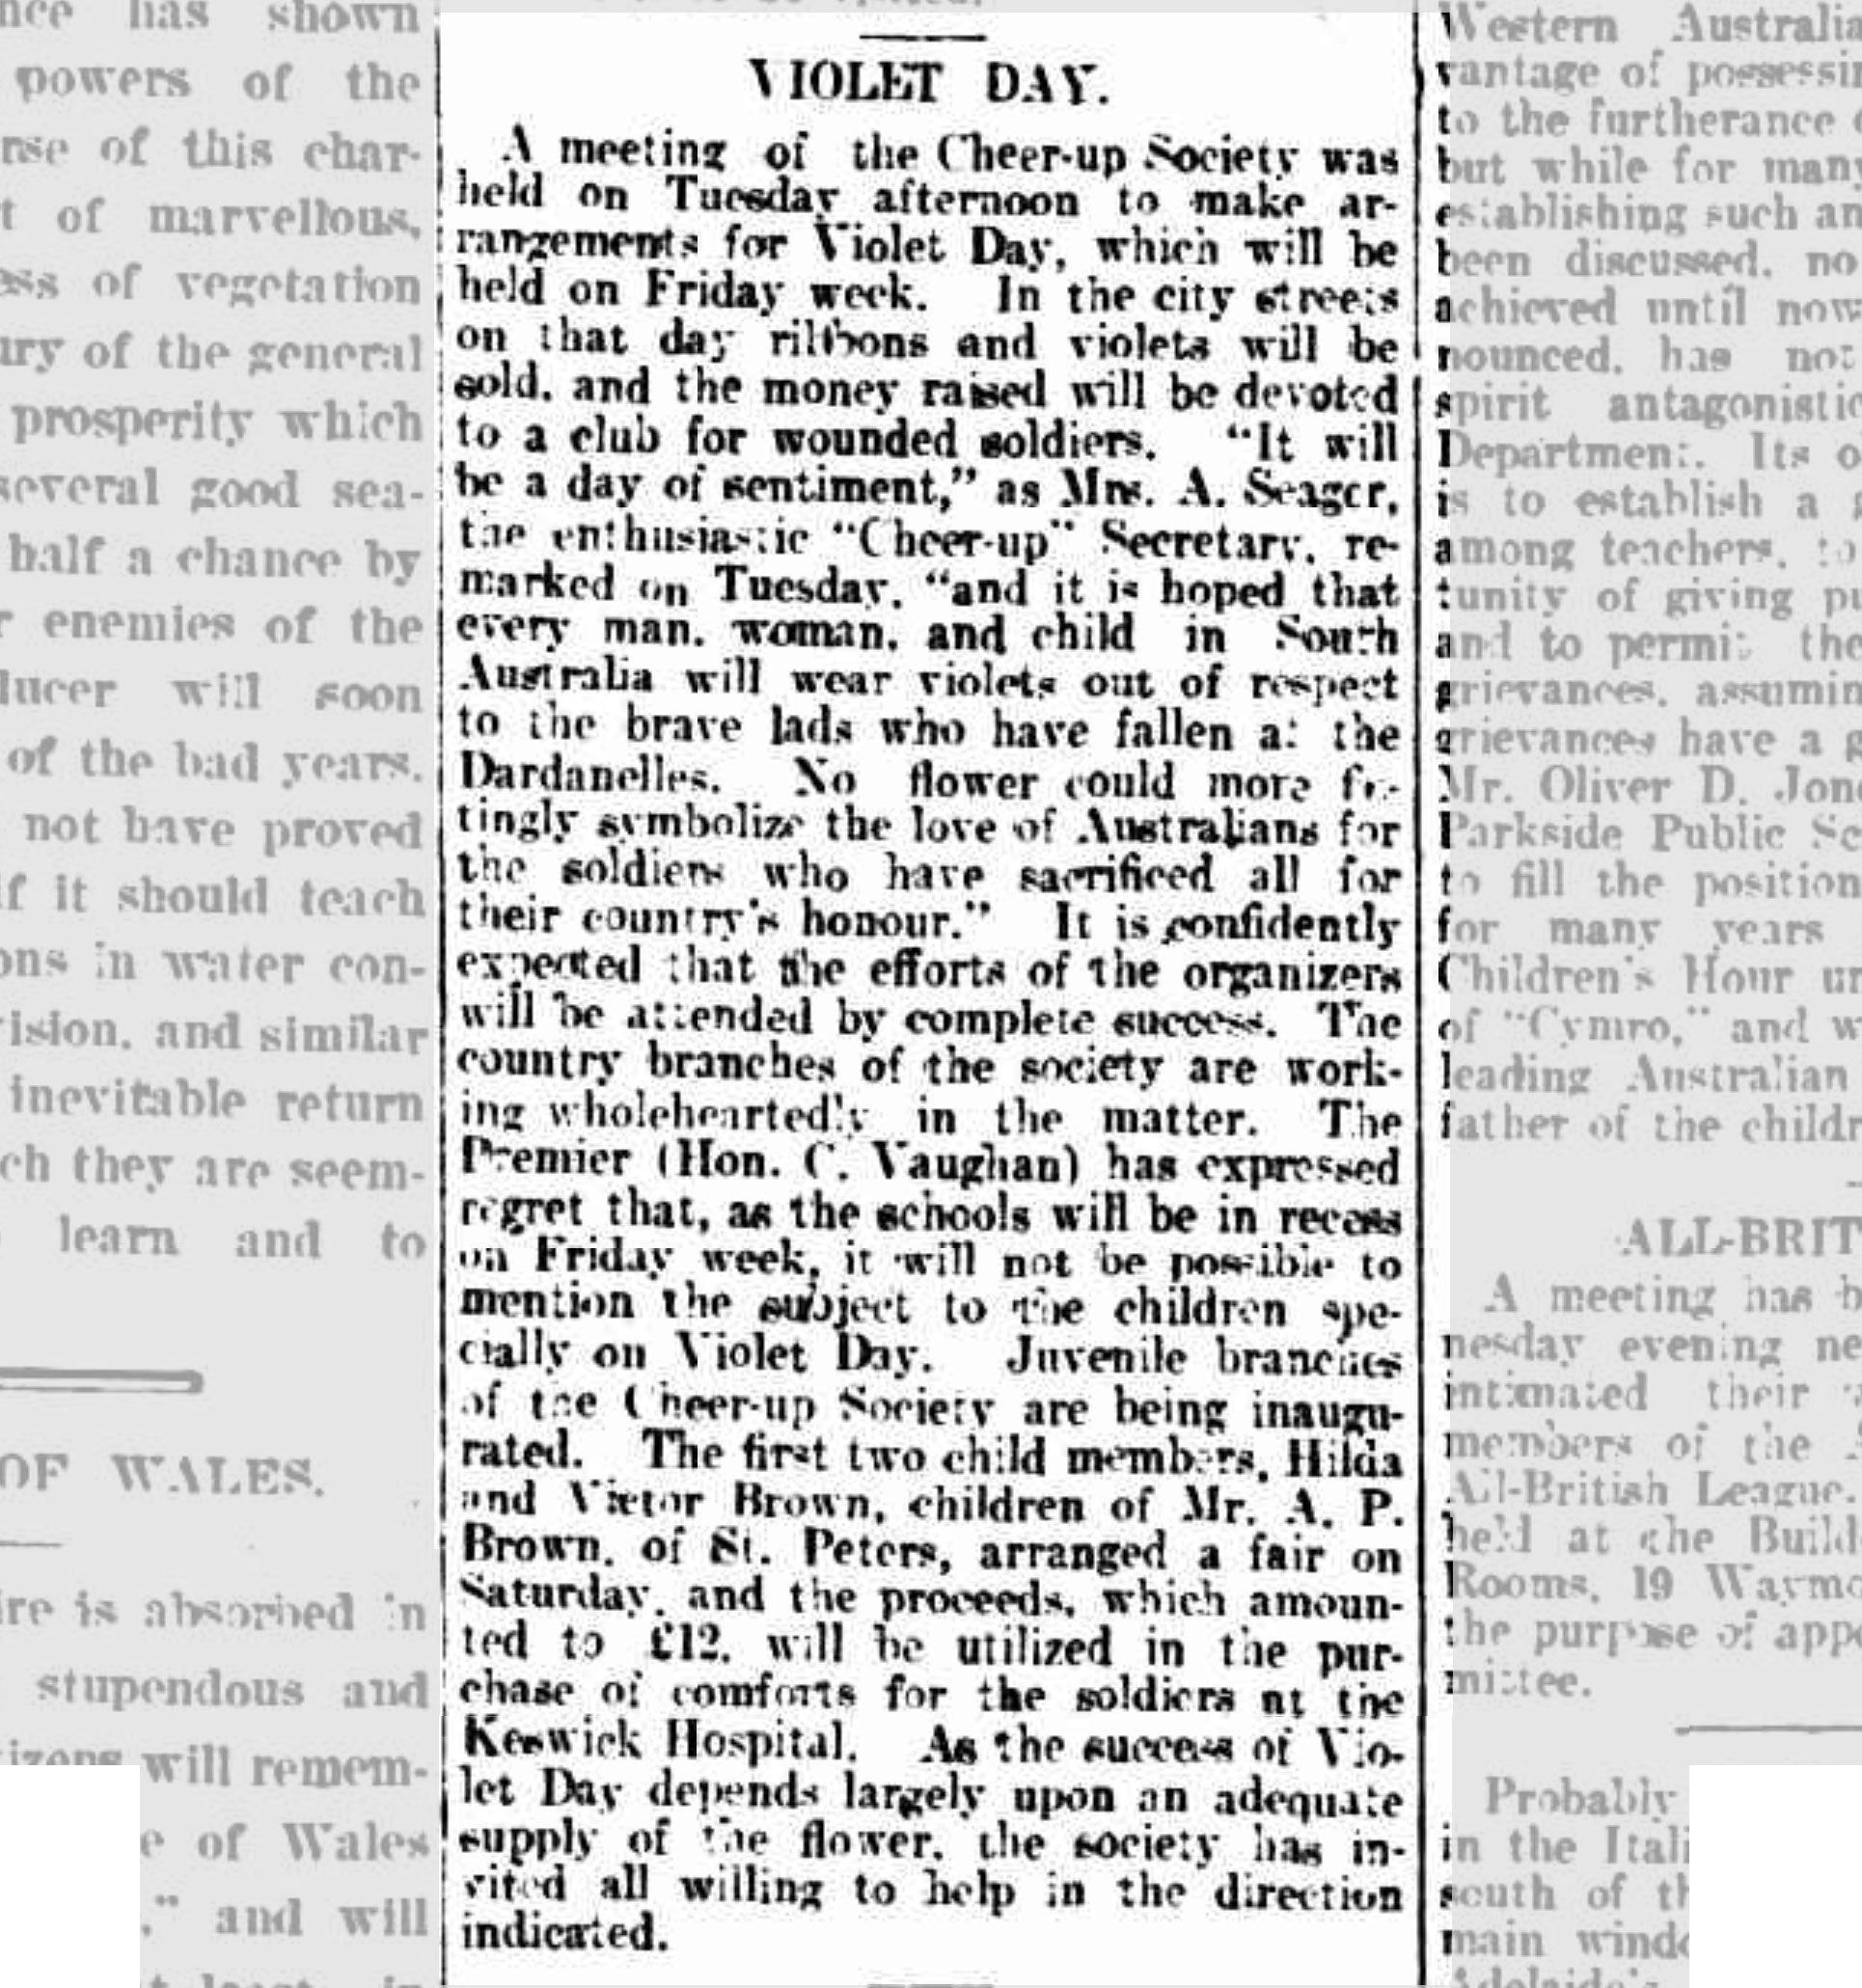 ‘Violet Day.’ The Register (Adelaide, SA 1901-1929, 23 June 1915, page 8. NLA: Trove 